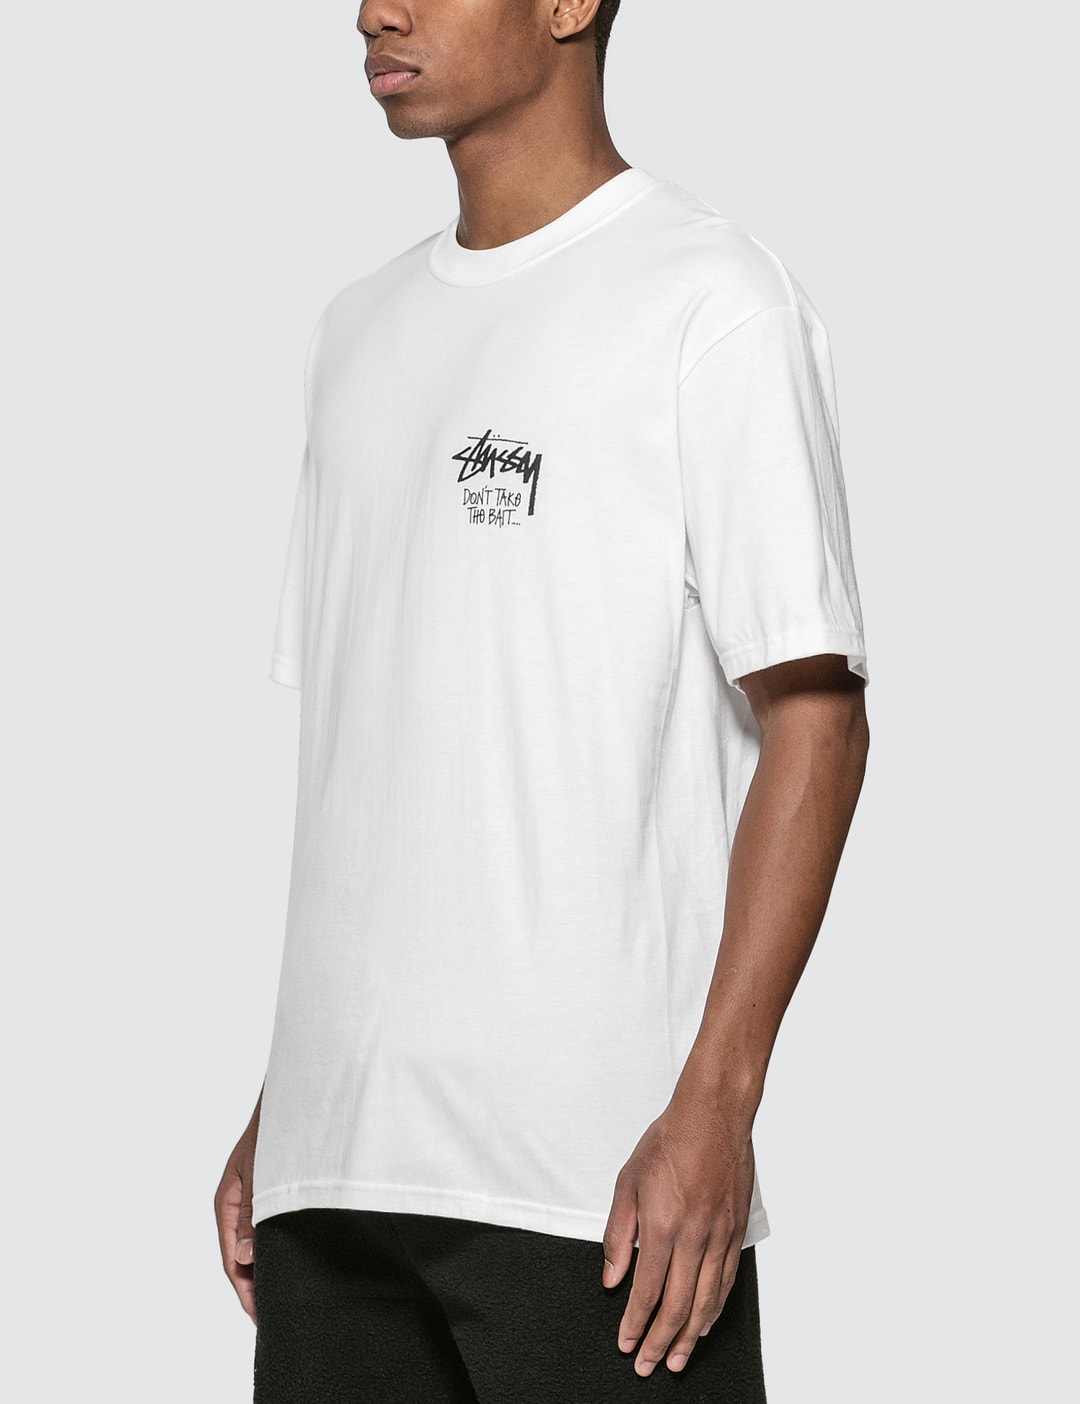 Stüssy - Don't Take The Bait T-shirt | HBX - Globally Curated Fashion ...